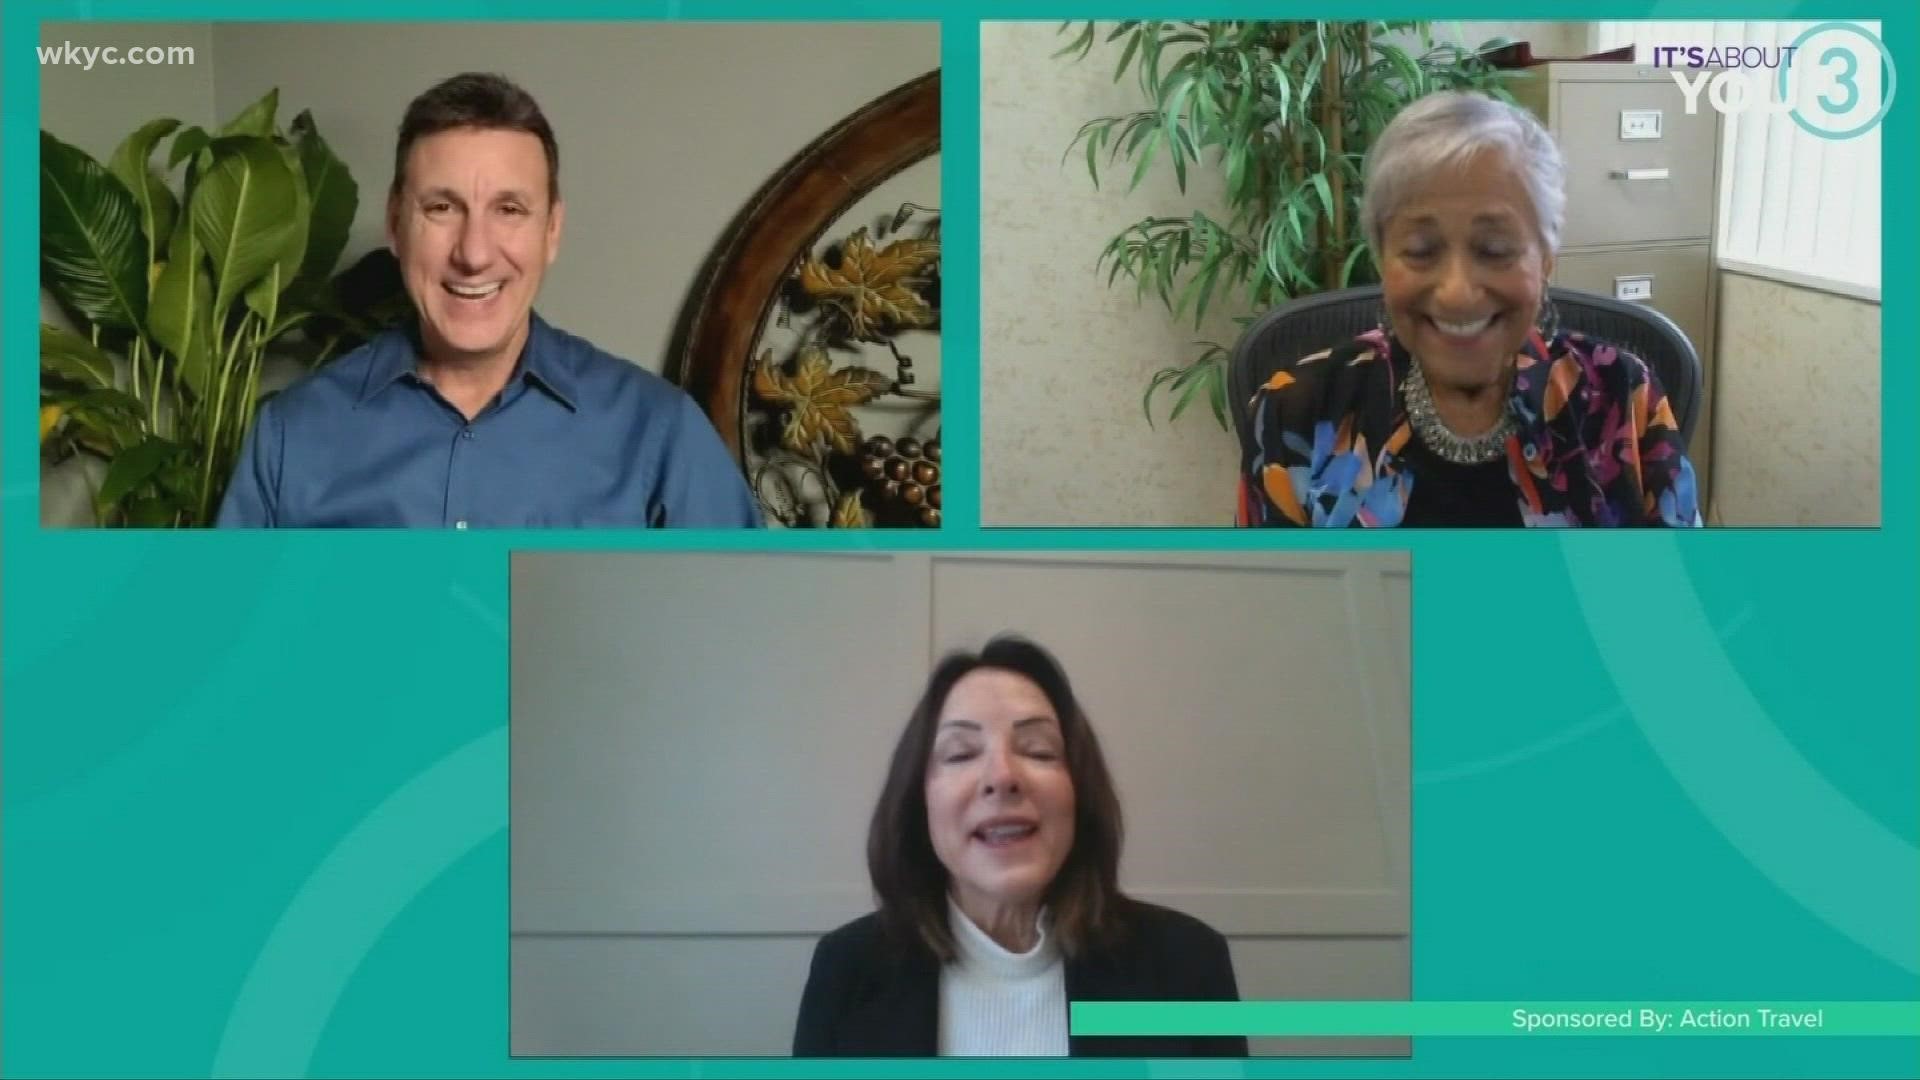 Joe is talking with Arlene Goldberg & Barbara Qua about traveling during the cooler months! Vacation in style with Action Travel and Celebrity Cruises!